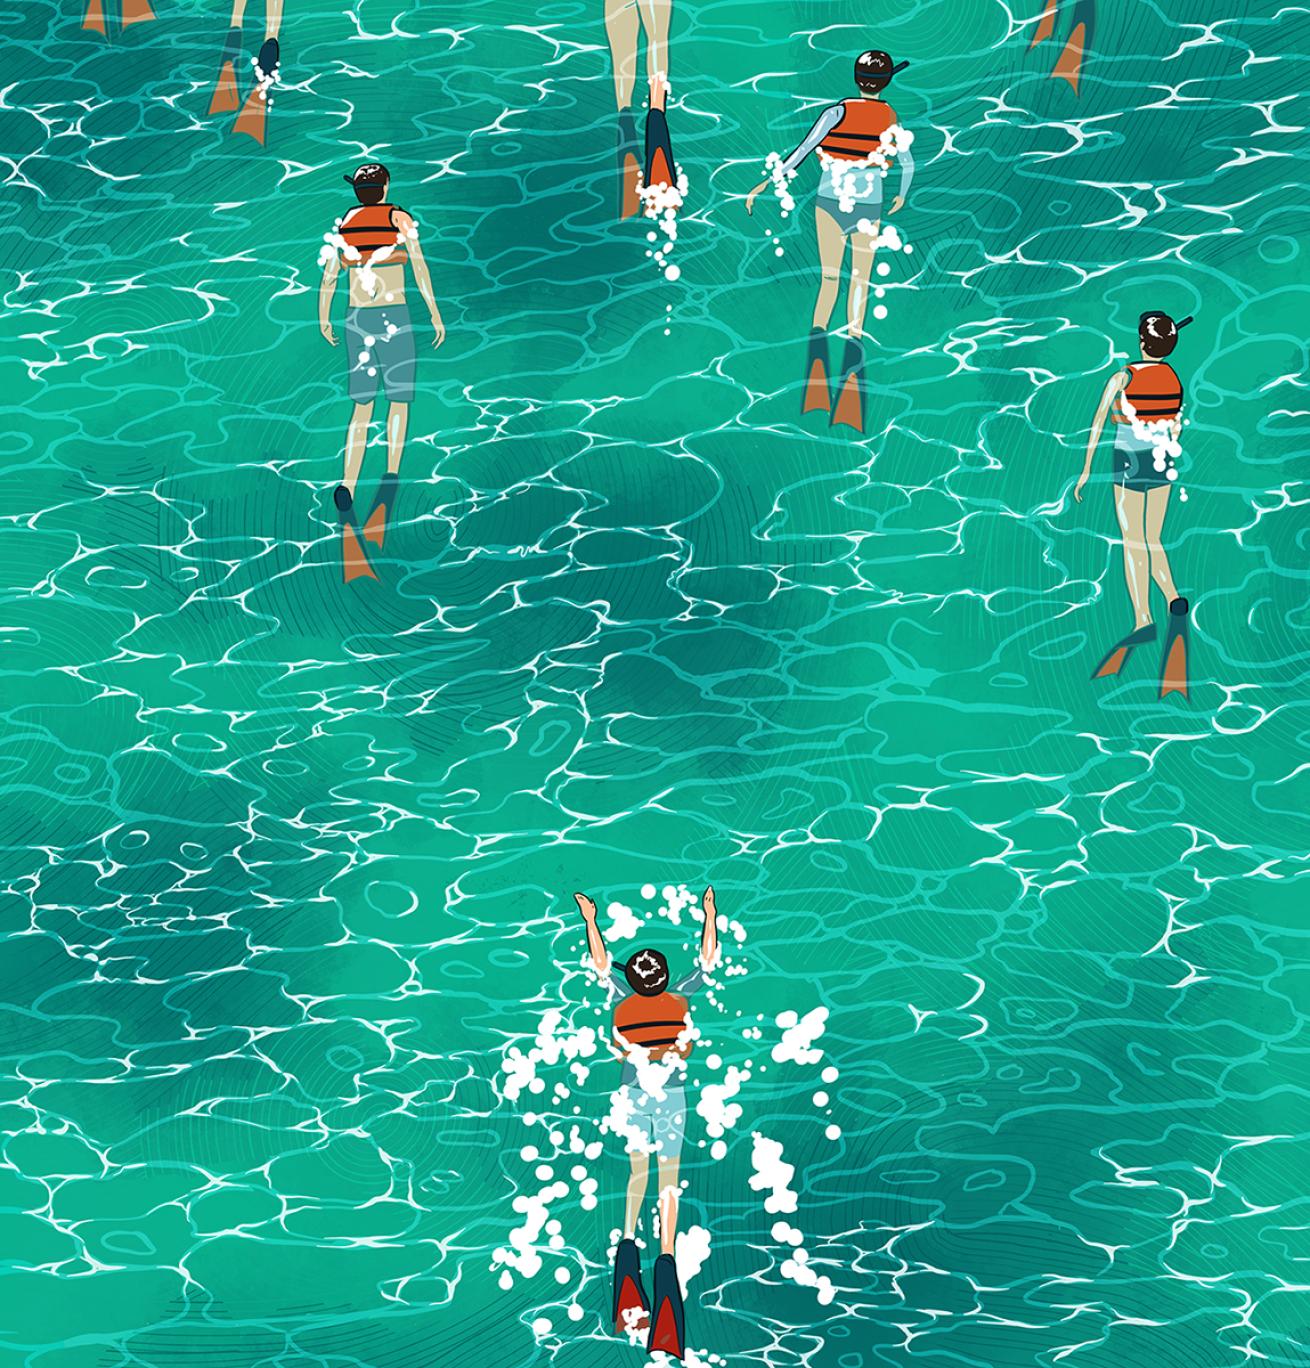 An illustration of a snorkeler splashing frantically in the water as other snorkelers leave them behind.